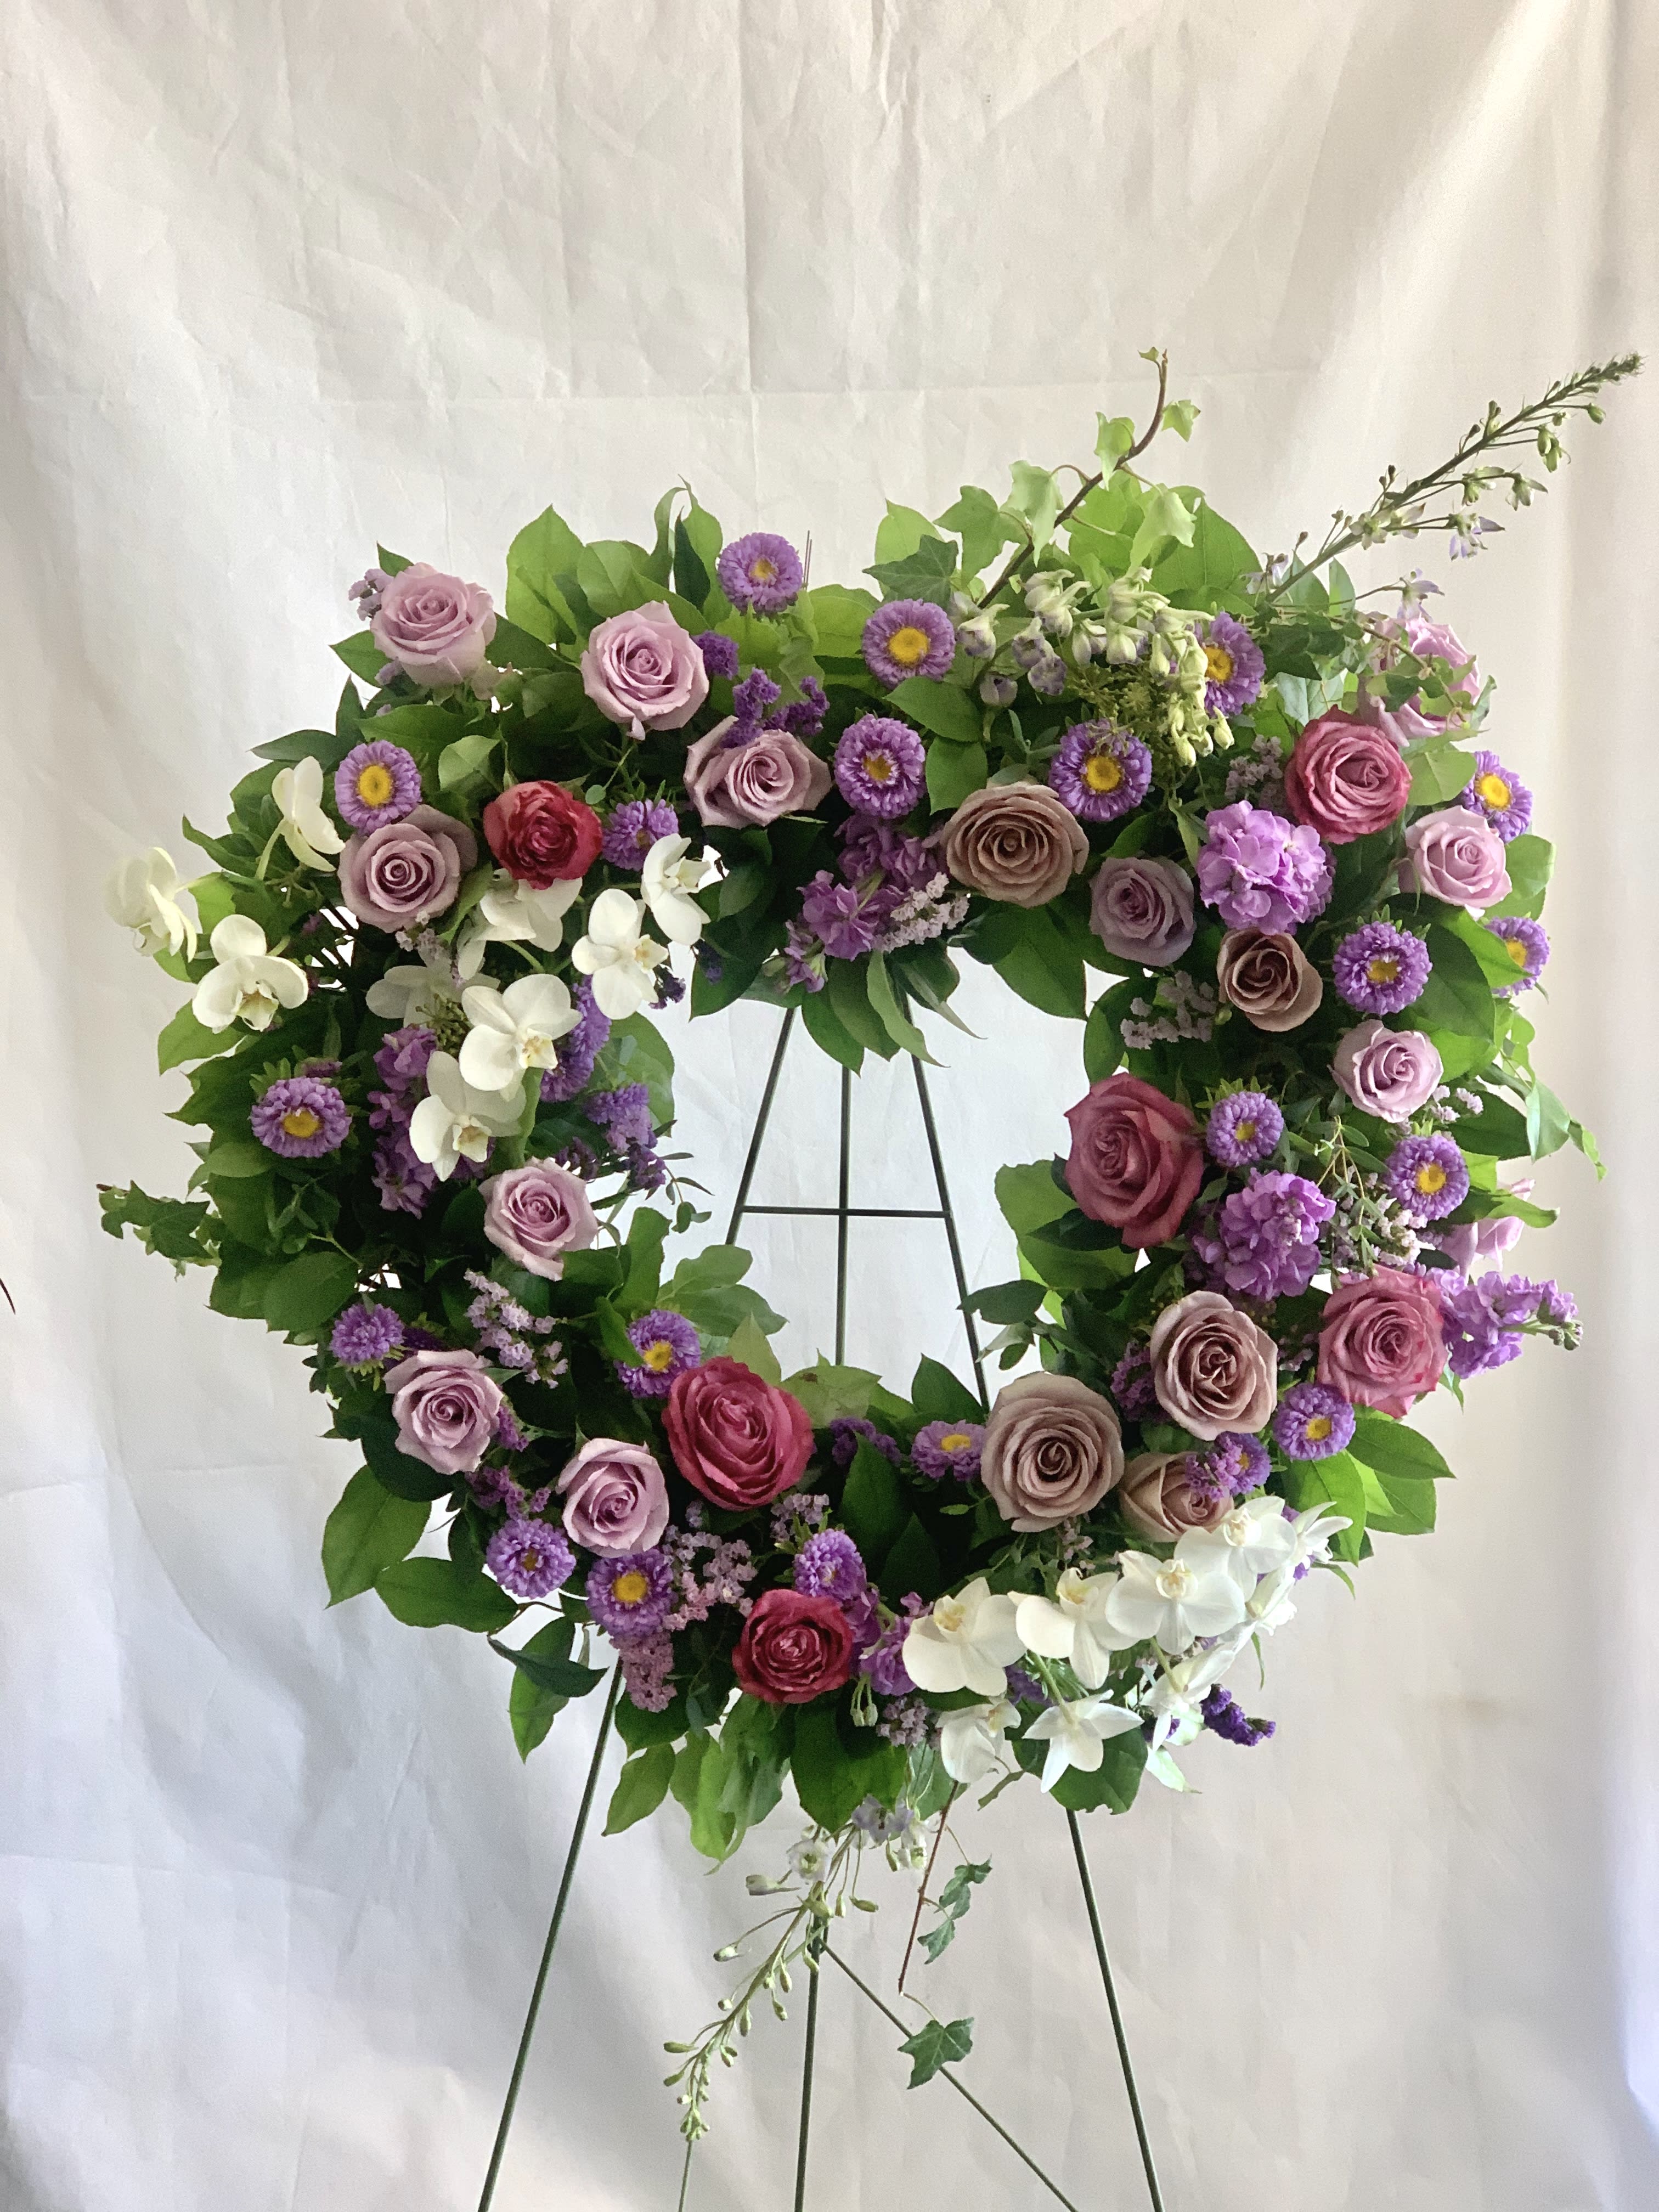 Standing Heart Wreath - A standing heart shaped wreath custom designed to your choice of colors. Picture shown is the Deluxe size.  Standard size is for 18&quot; heart wreath. Deluxe size is for 24&quot; heart wreath.  Please designate colors in the Special Instructions box.